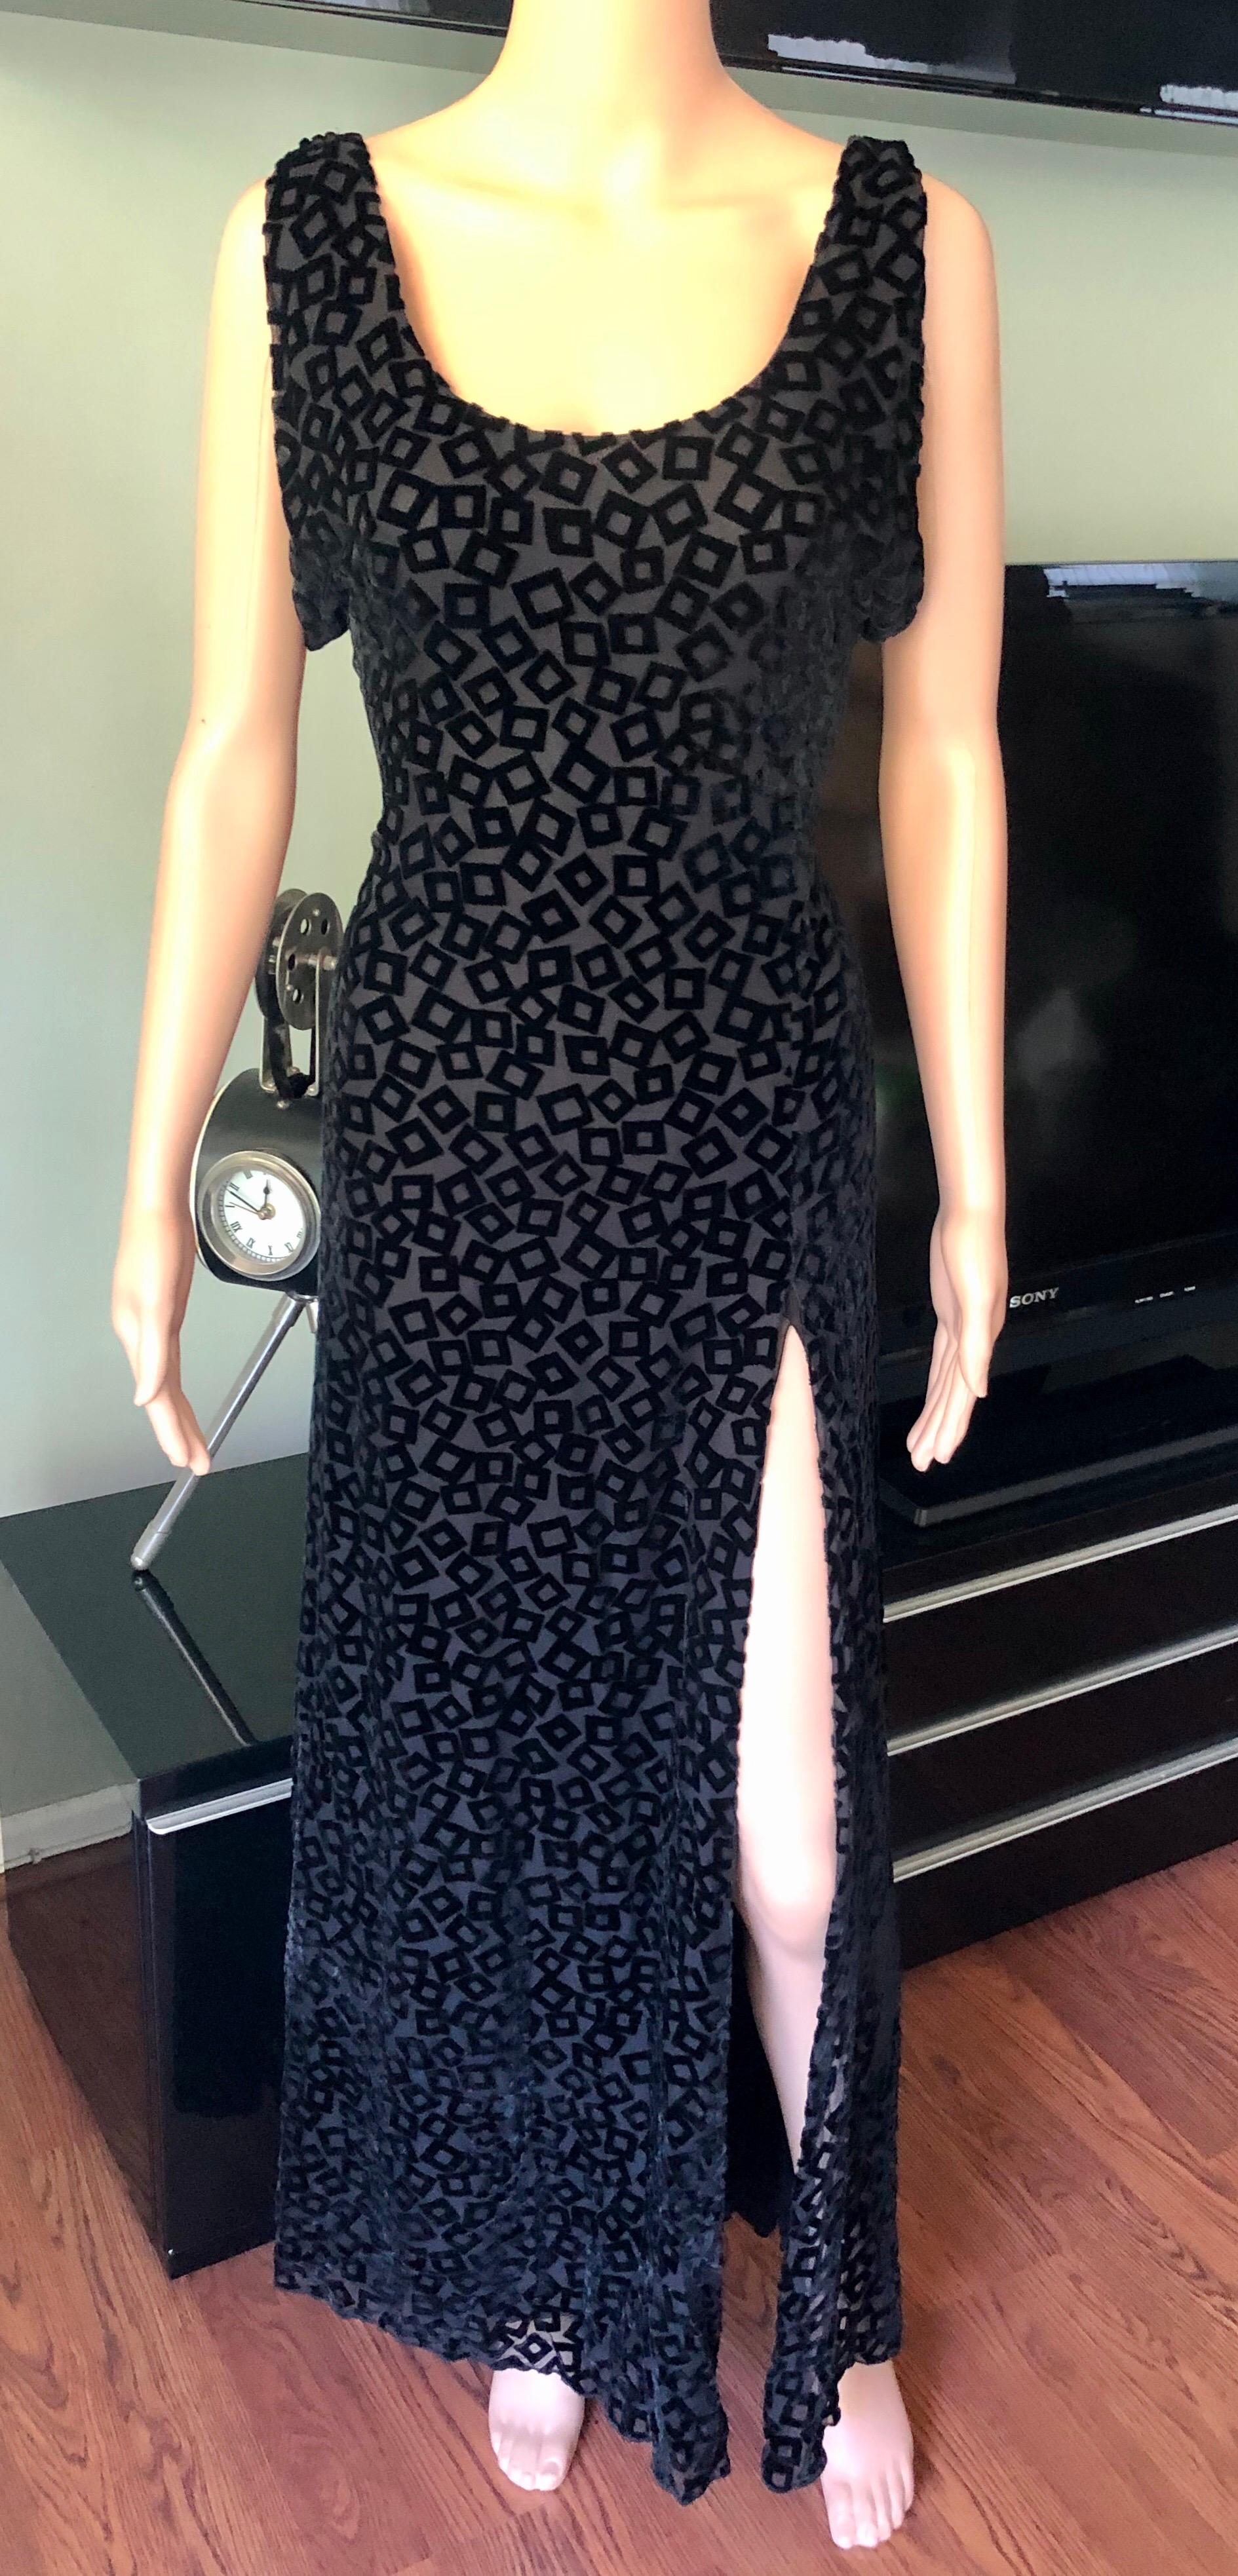 Gianni Versace S/S 1999 Vintage Black Evening Dress Gown In Good Condition For Sale In Naples, FL